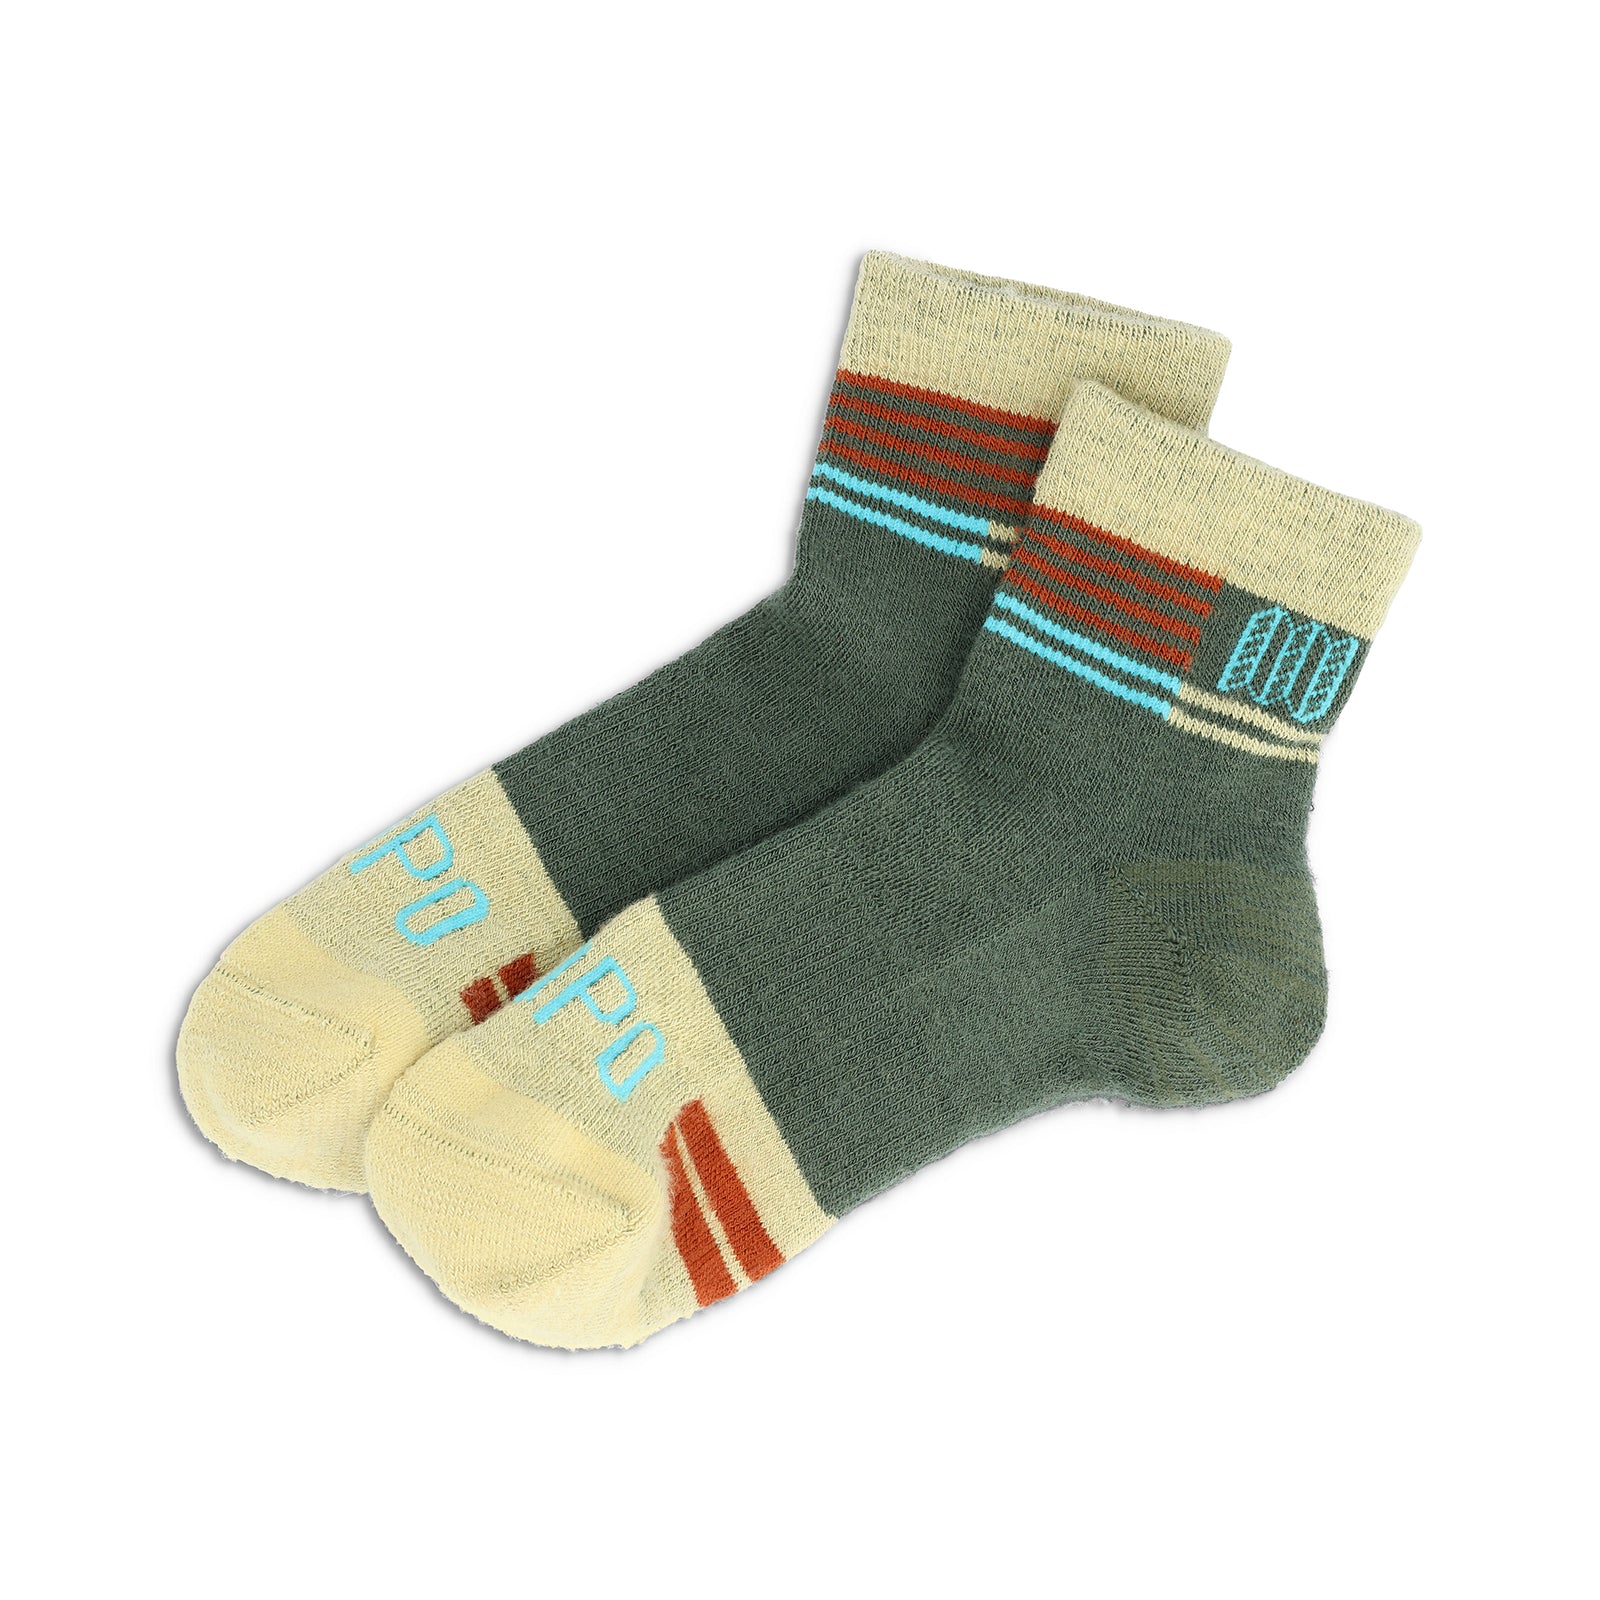 Front View of Topo Designs Mountain Trail Sock in "Olive / Hemp"